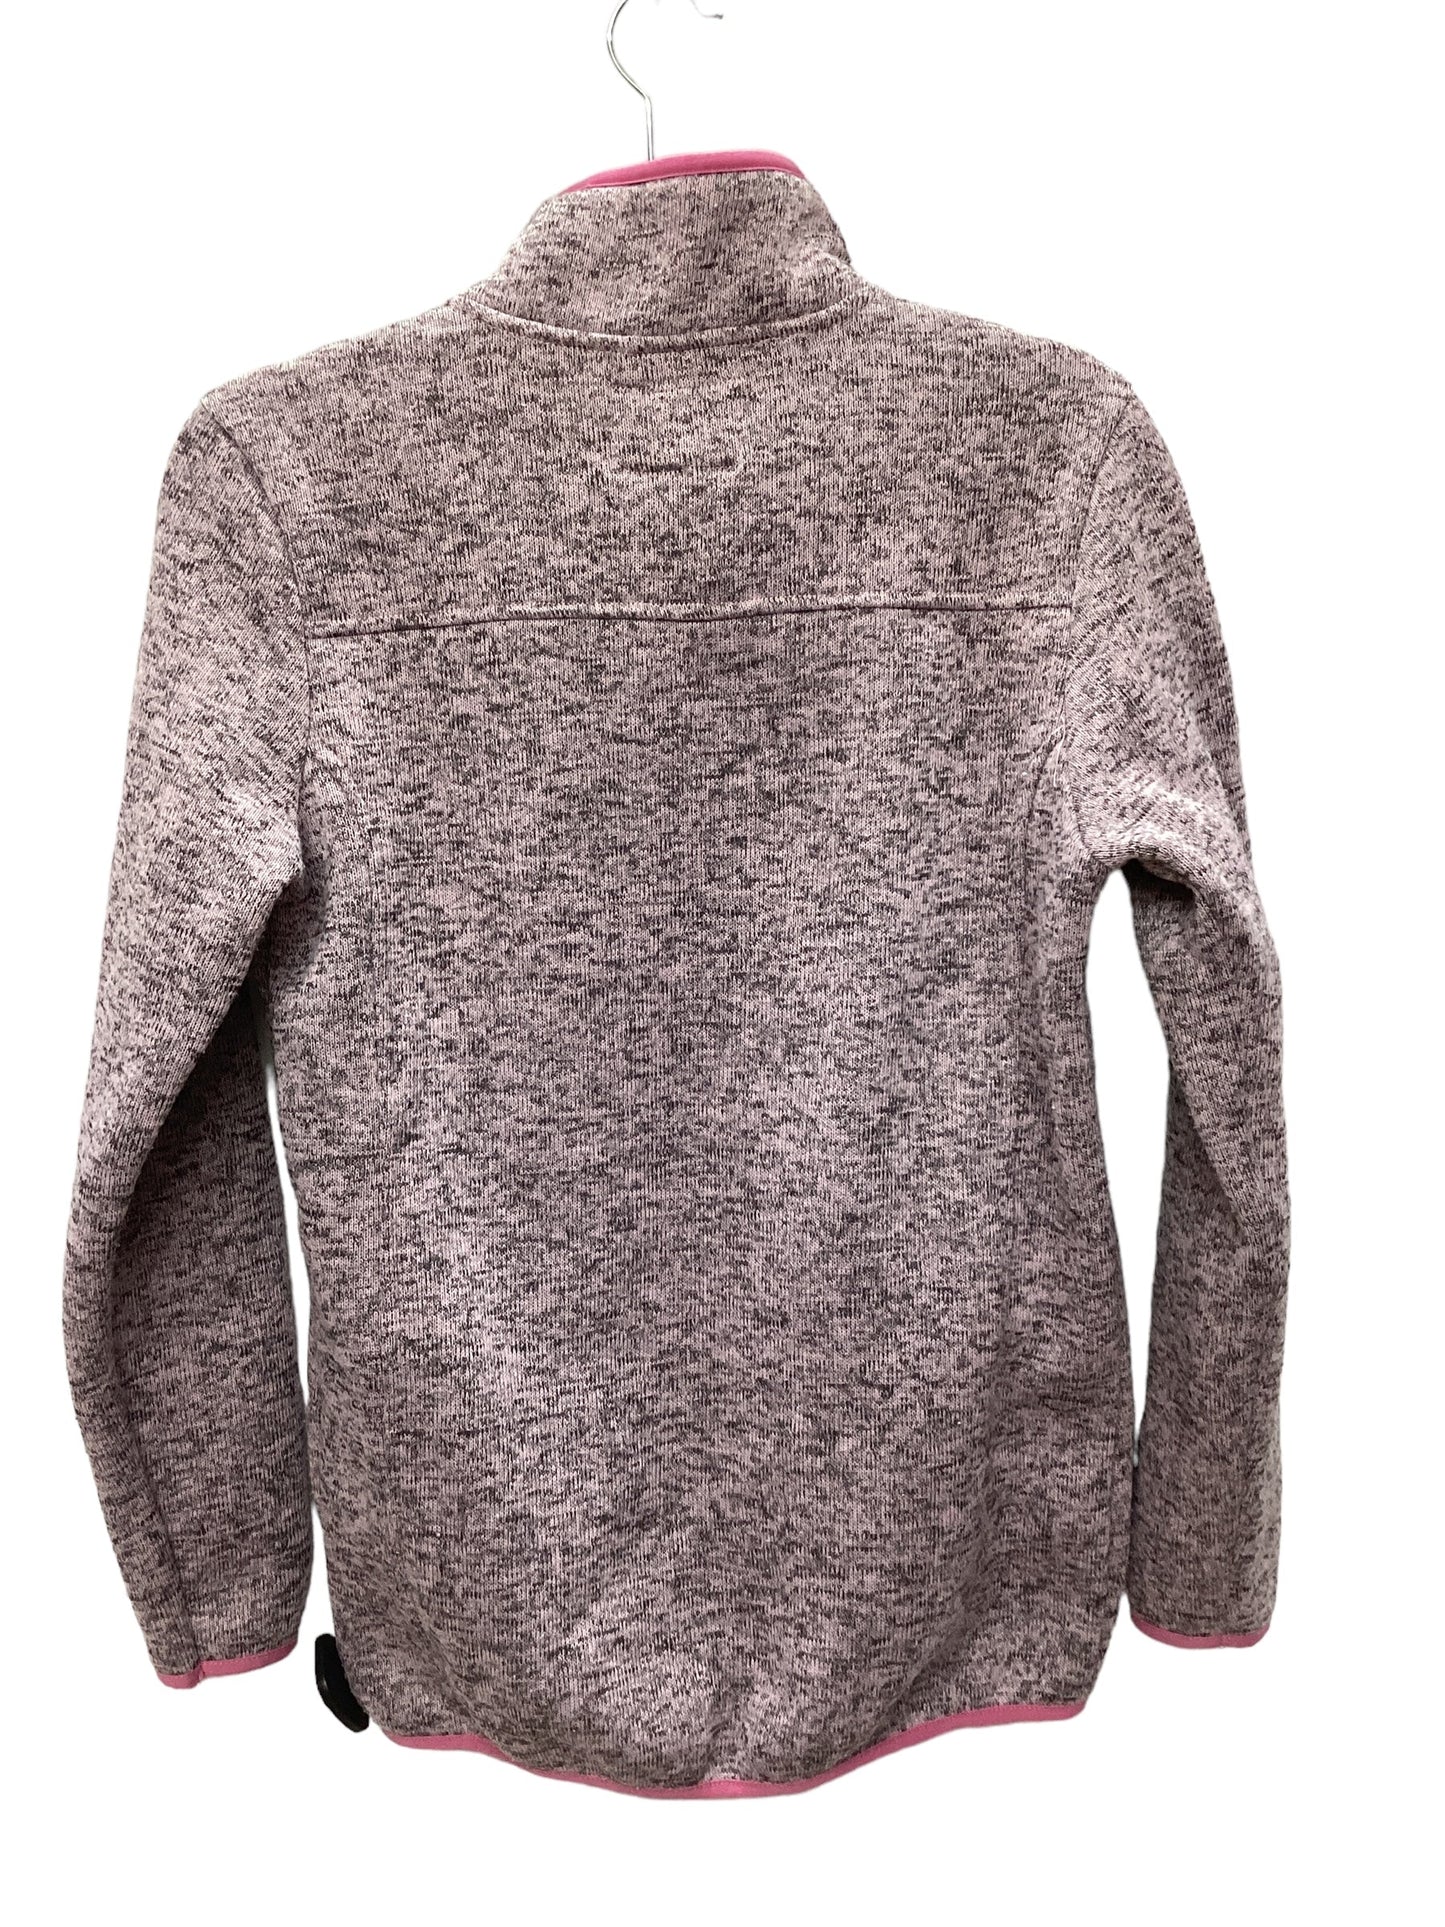 Sweatshirt Crewneck By Simply Southern  Size: S